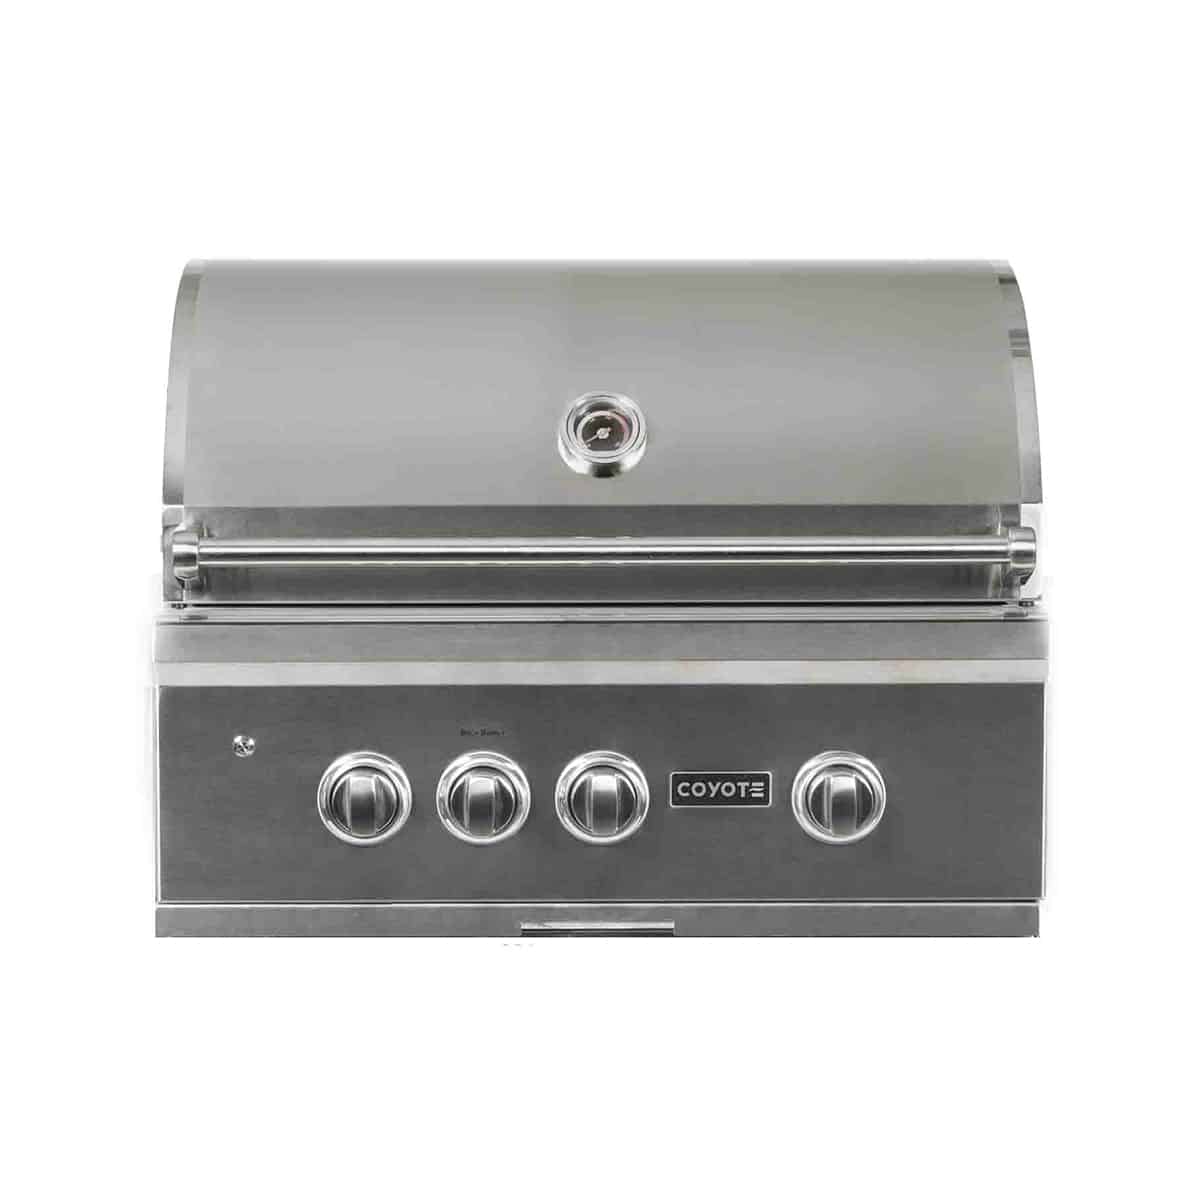 Coyote S-Series 30 Inch Built-In 3-Burner Grill Front Hood Cover Closed